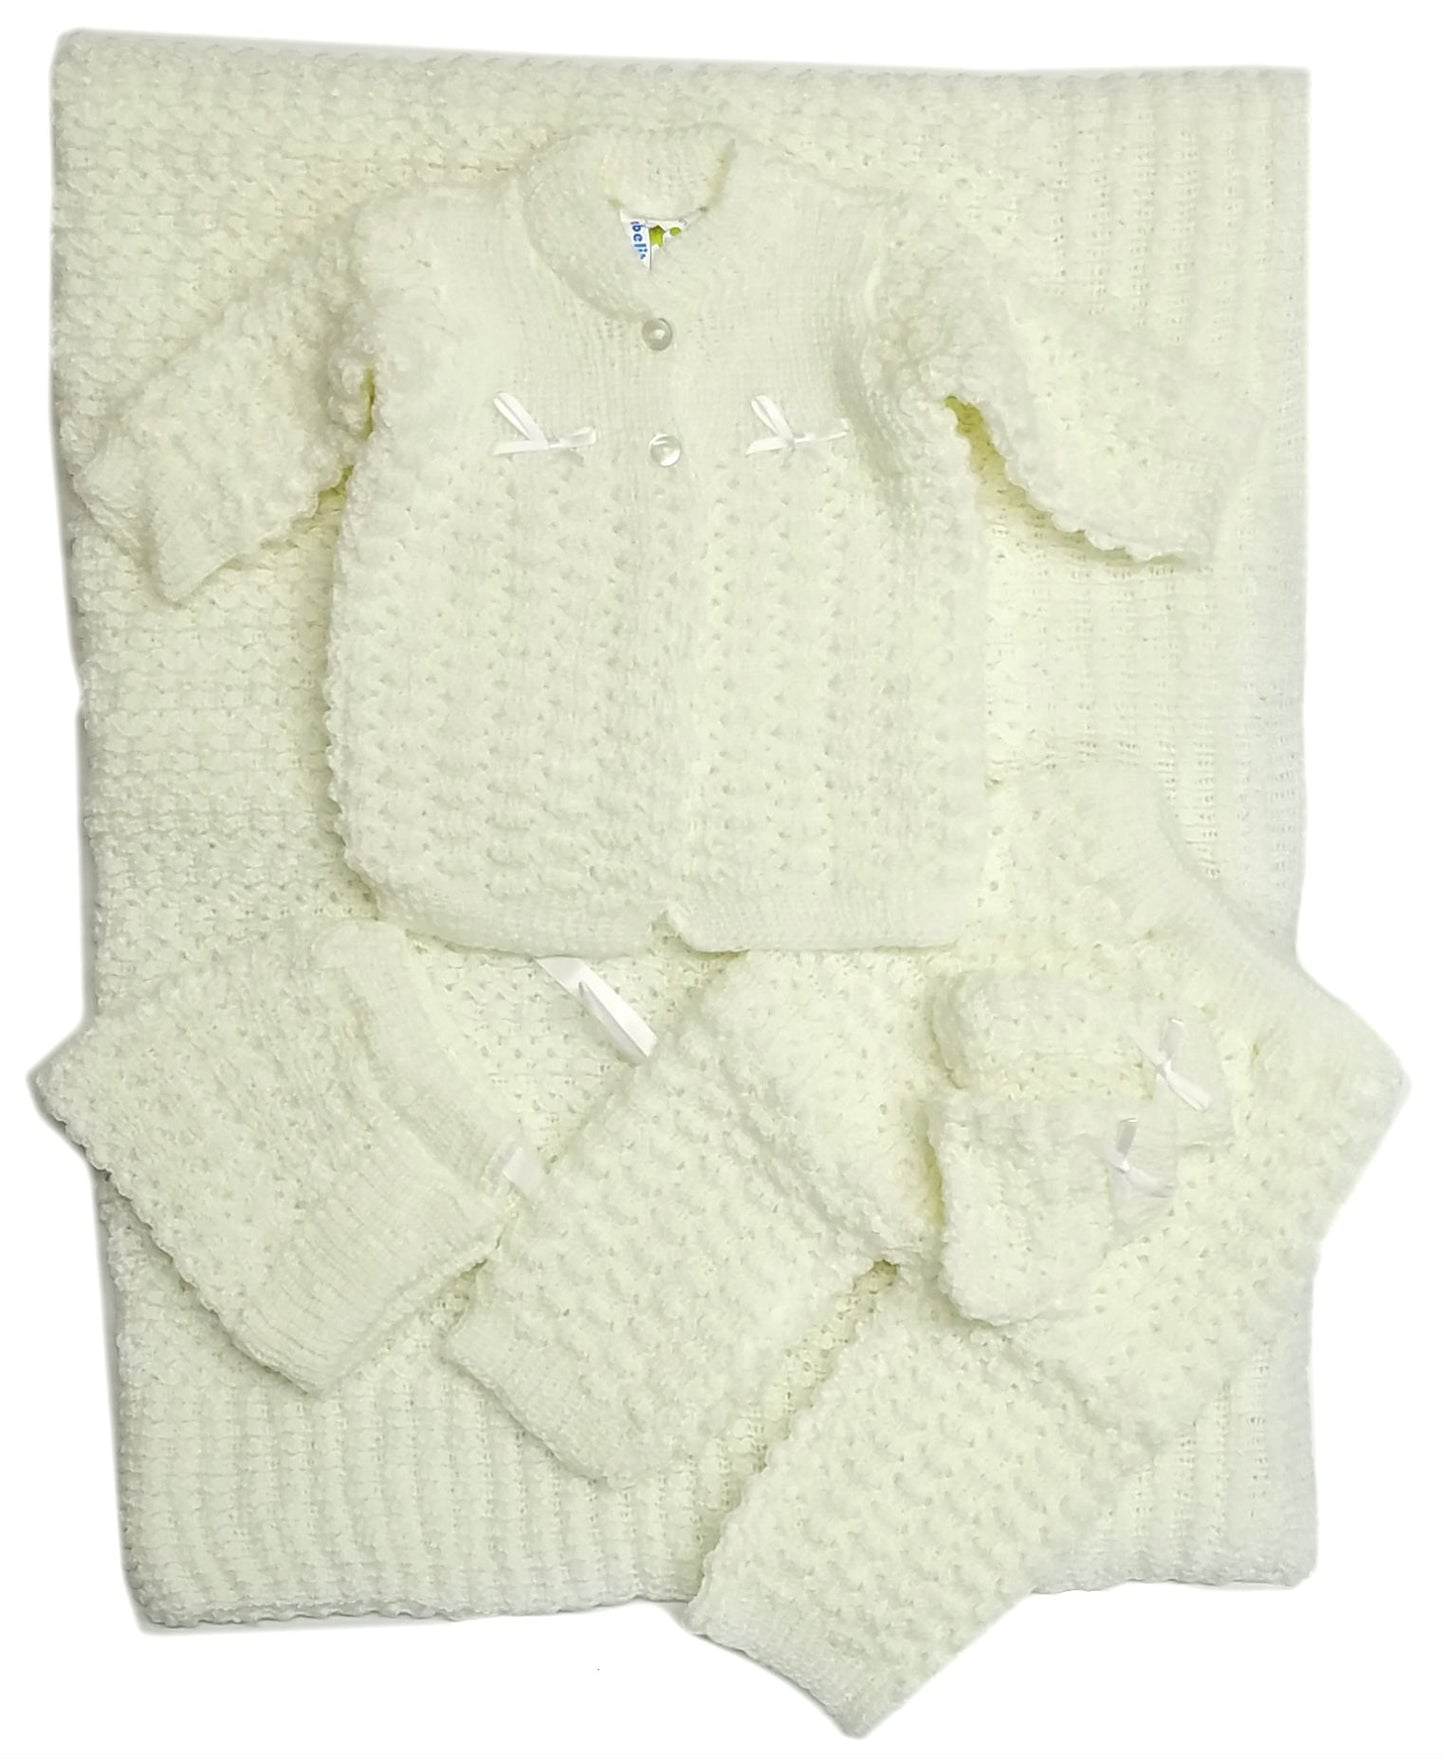 Wholesale Crochet Baby Blanket and Hat Newborn Outfit Set Mittens Pants Sweater 5 Pcs Set